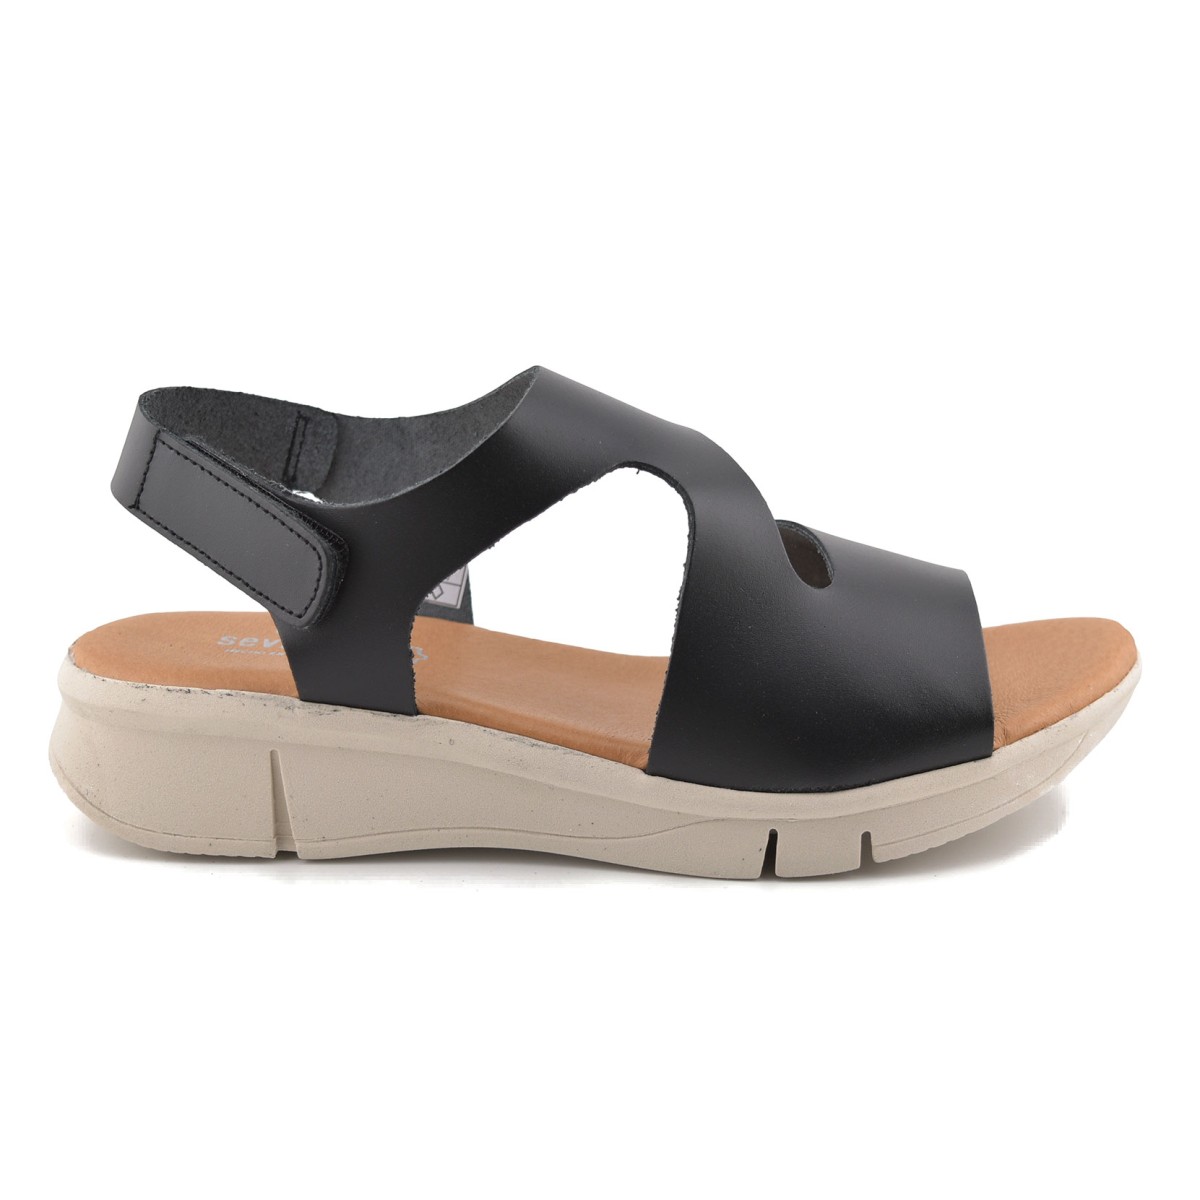 Black leather sandals by CBP